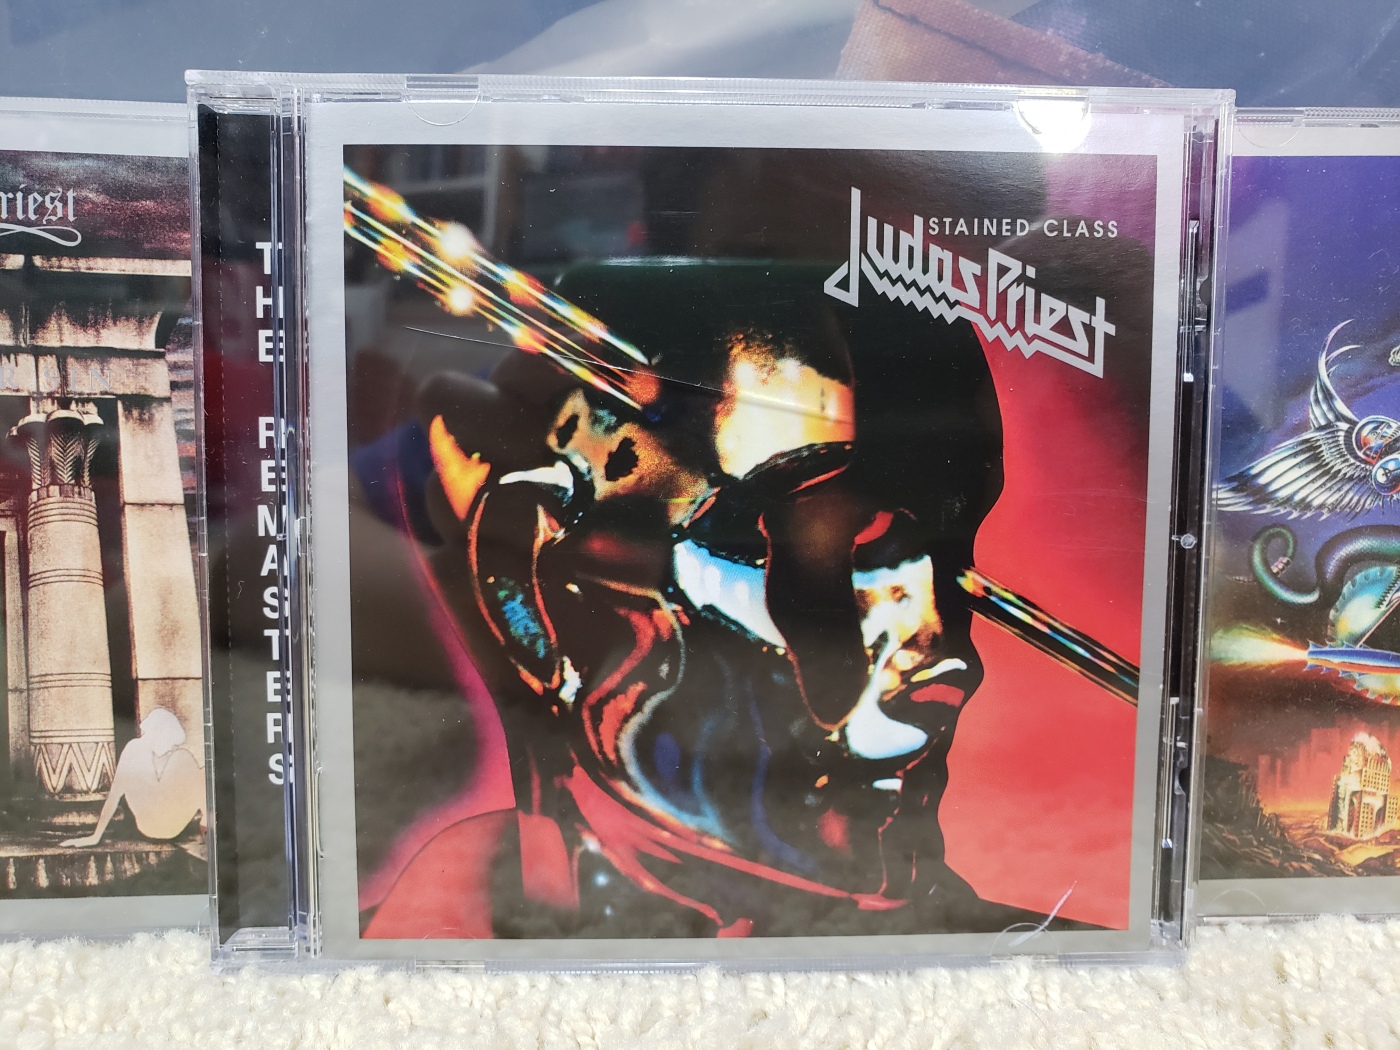 Judas Priest's 'Stained Class' Was Such a Disappointment, Album Review –  Lana Teramae